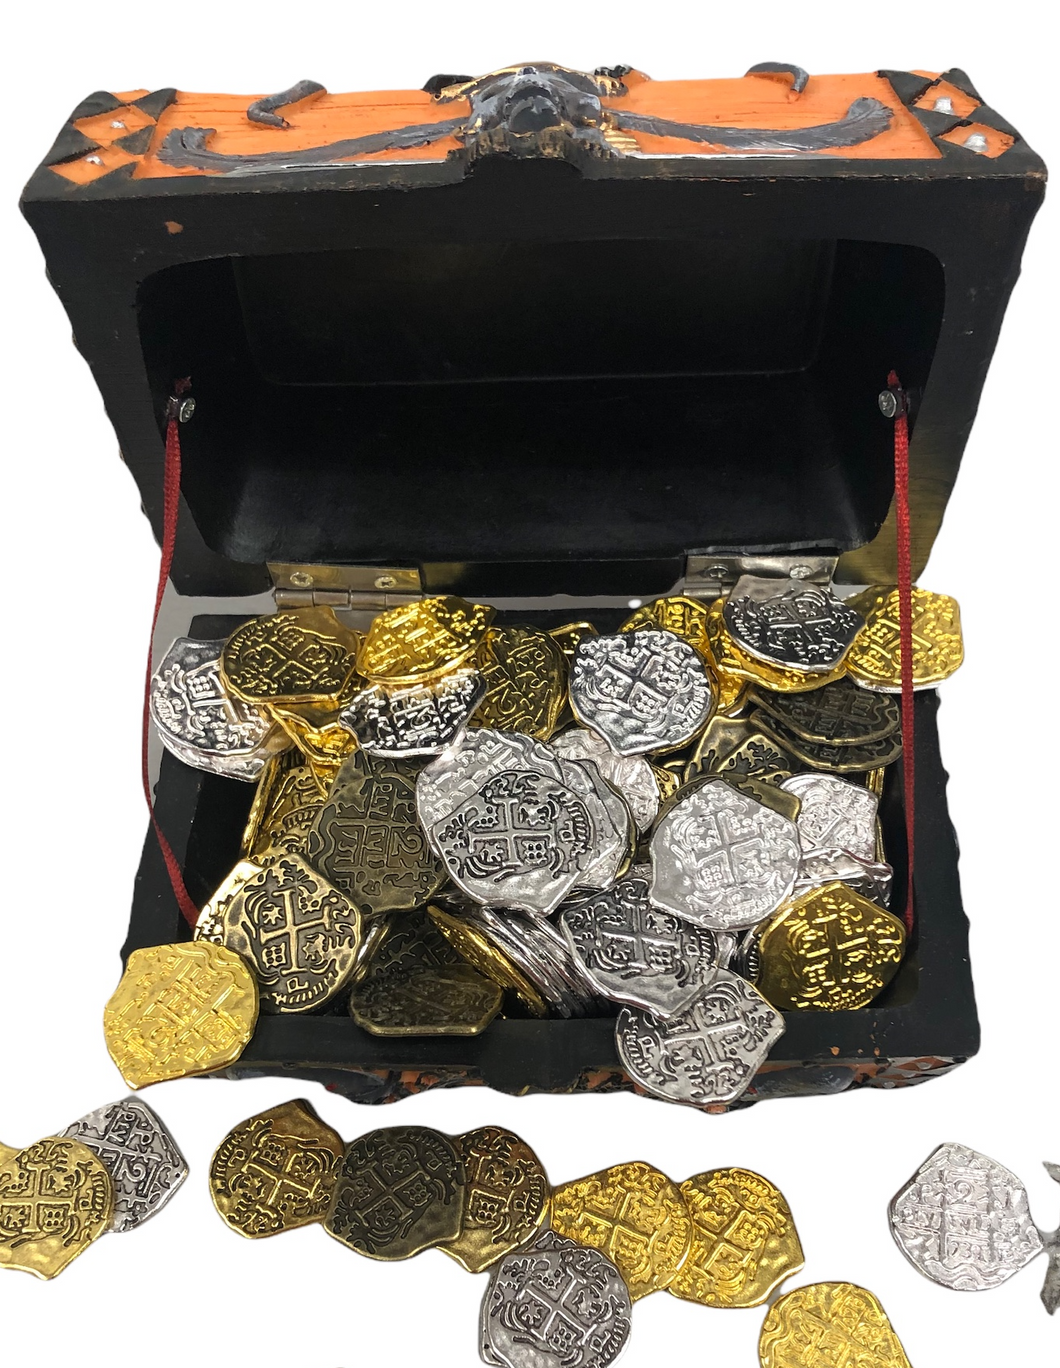 Seven Seas Pirates - Buccaneer Treasure Octopus Chest with Lot of 100 Mixed 5 Color Doubloons - Rogue`s Jewelry Box Filled Coins for Pretend Games